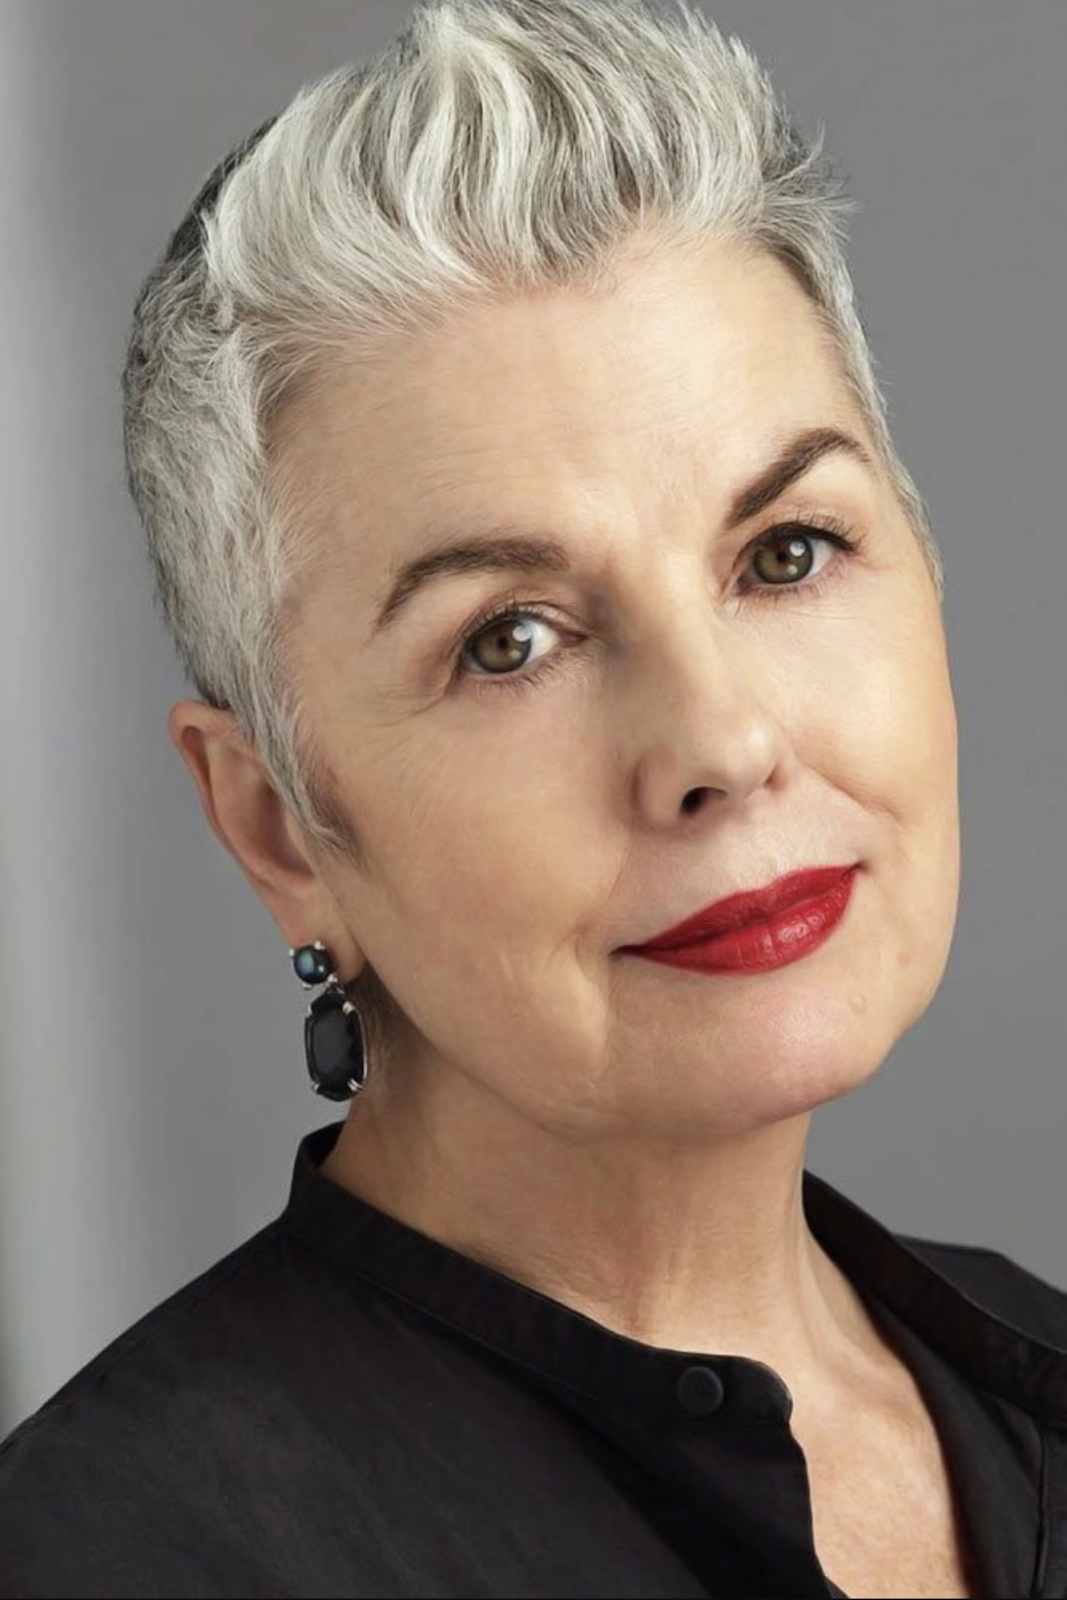 2019 2020 Short Hairstyles for Women Over 50 That Are Cool Forever